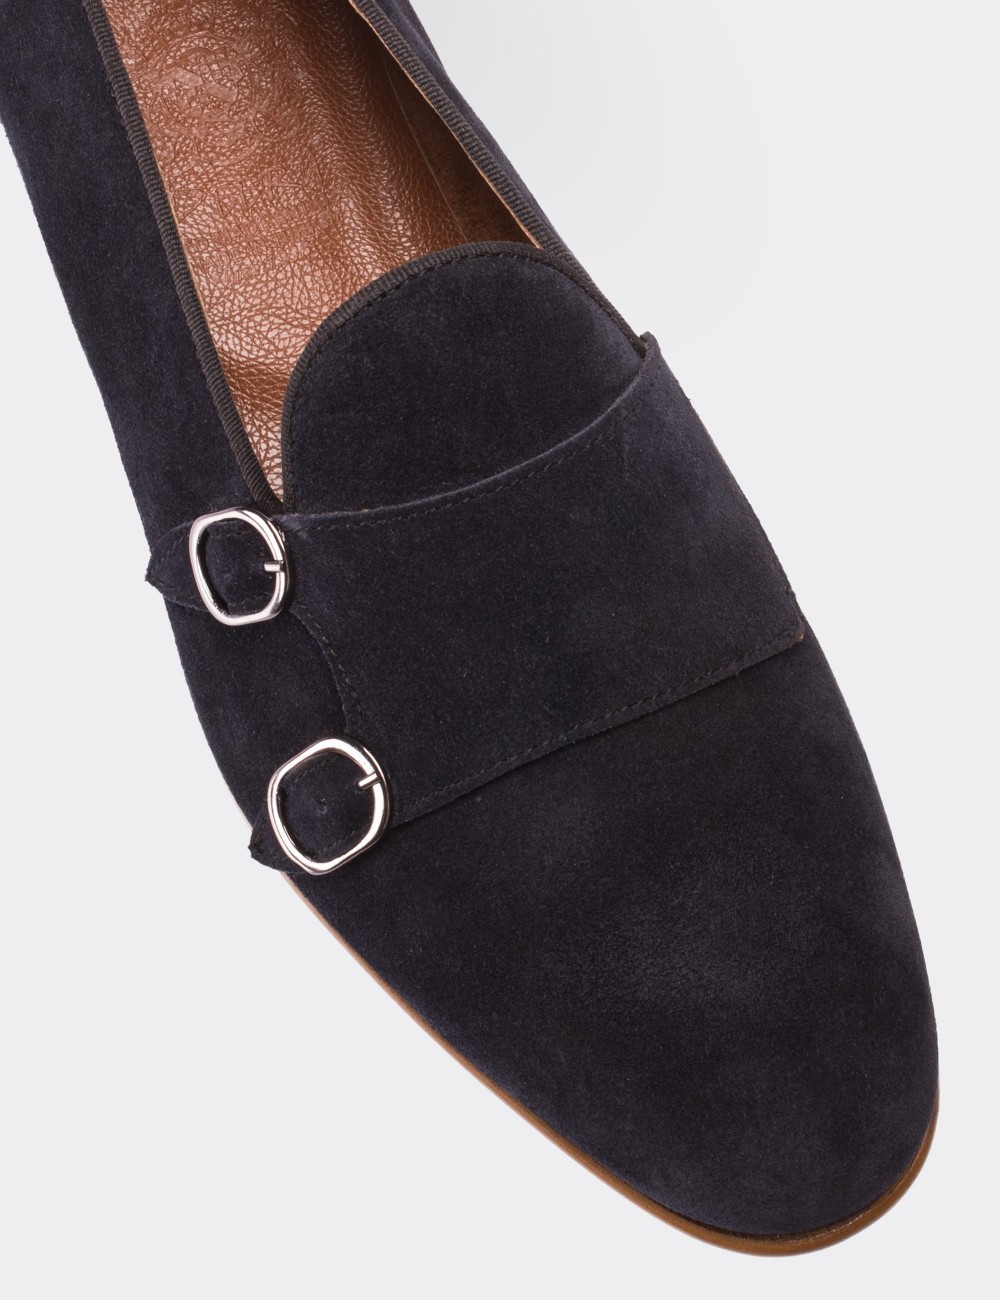 Navy Suede Leather Monk-Strap Loafers - 01705MLCVM01